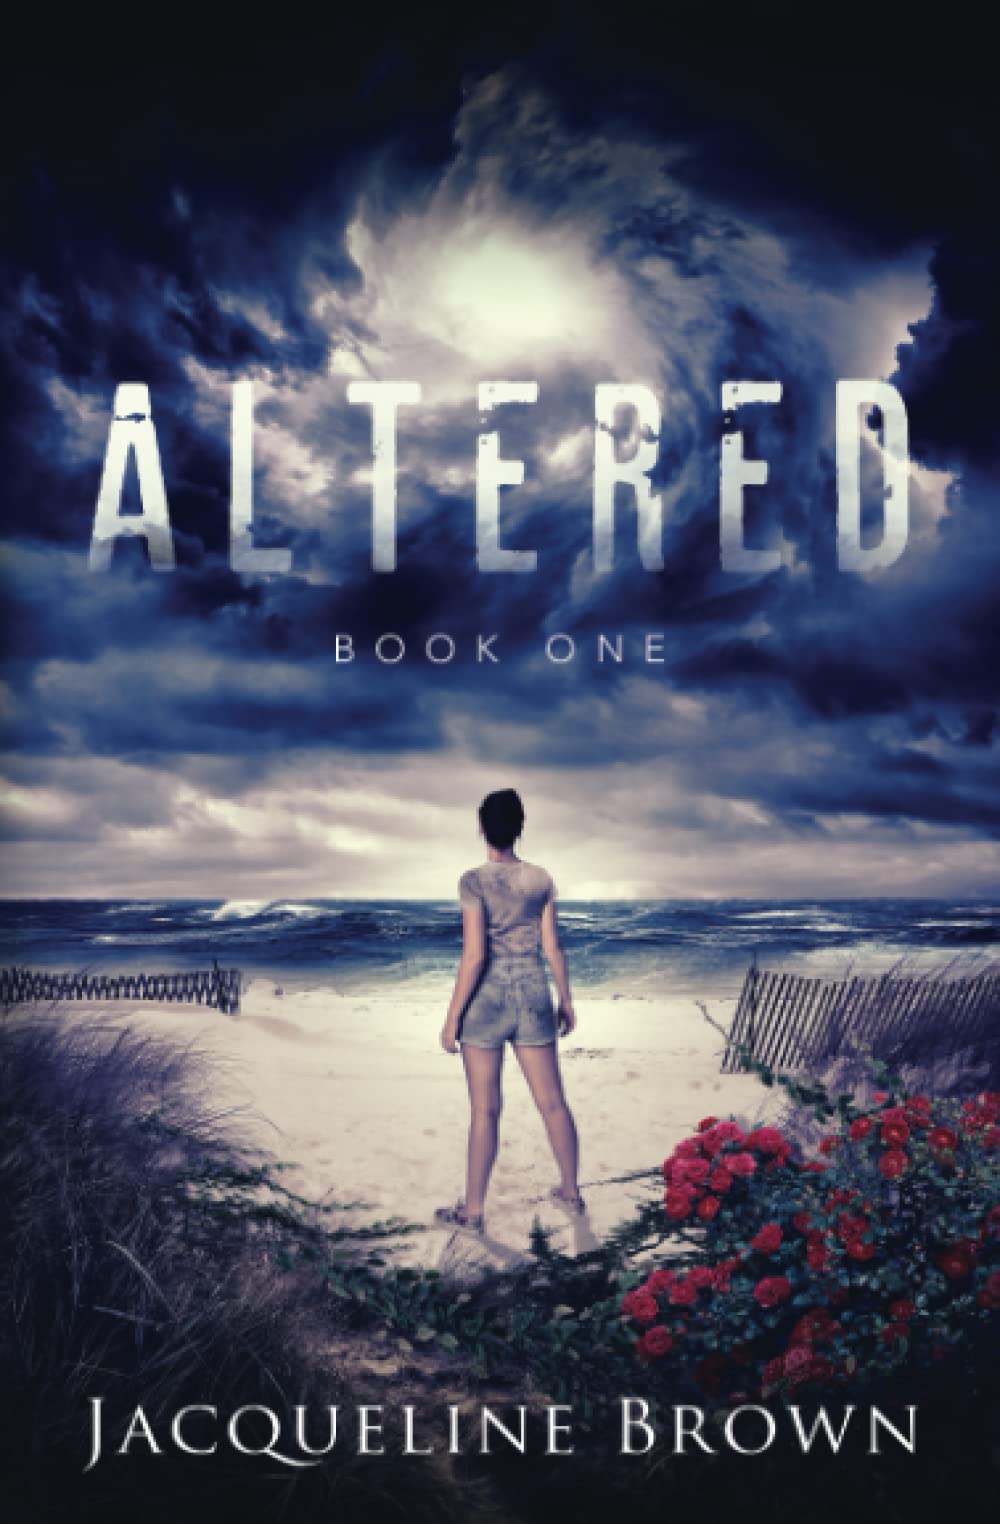 Dystopian Fiction Altered